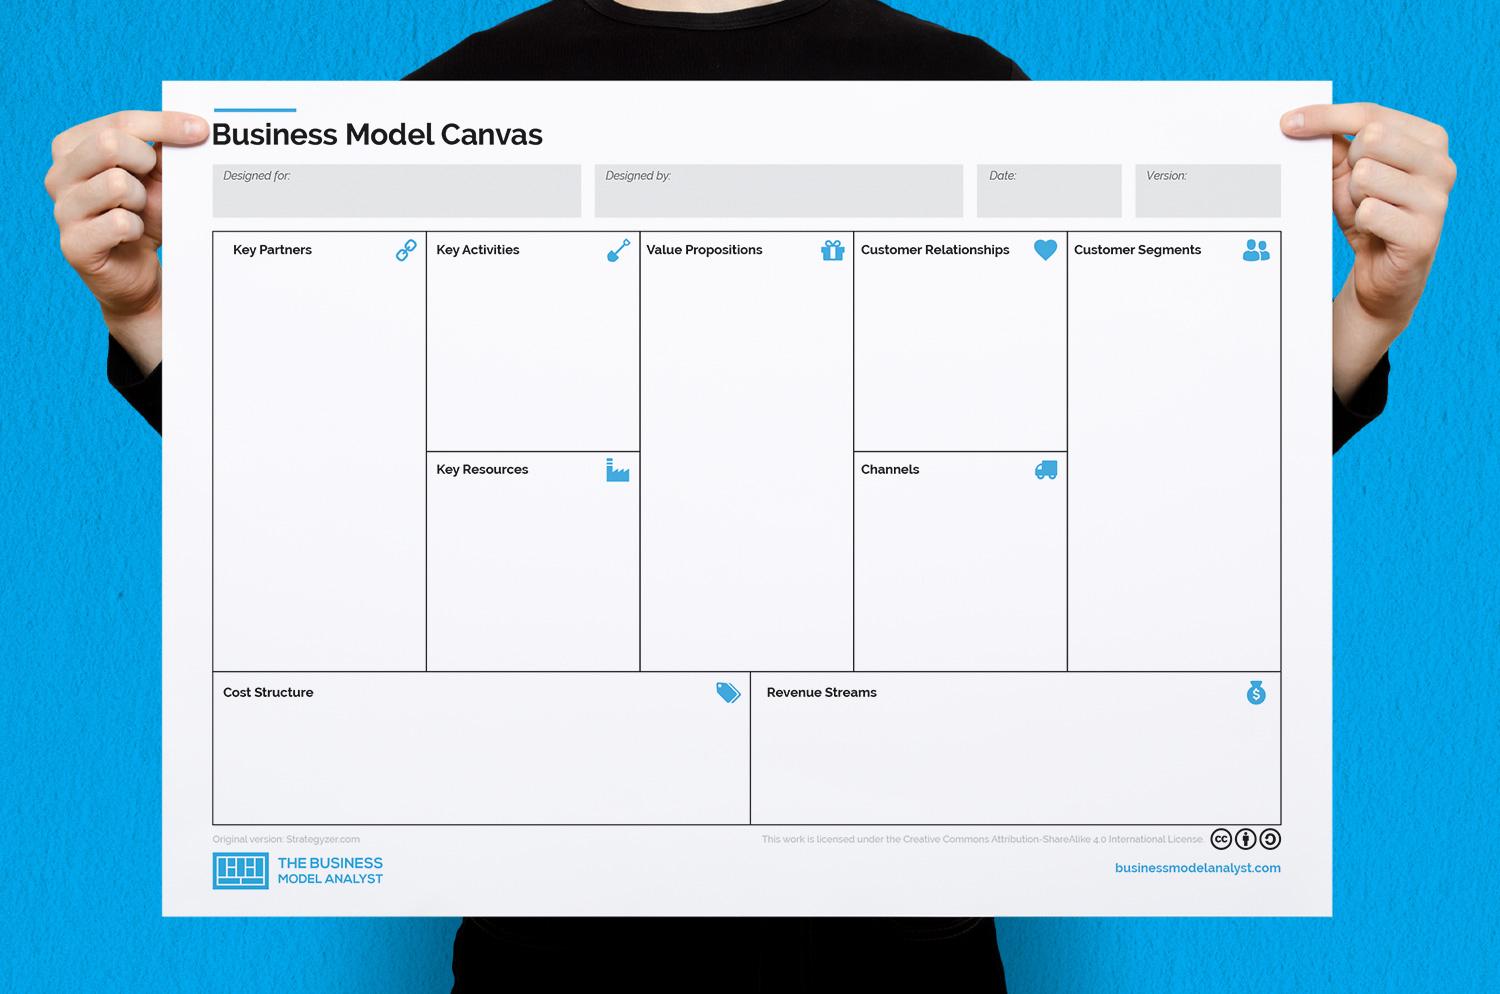 Business Model Canvas Template in PDF